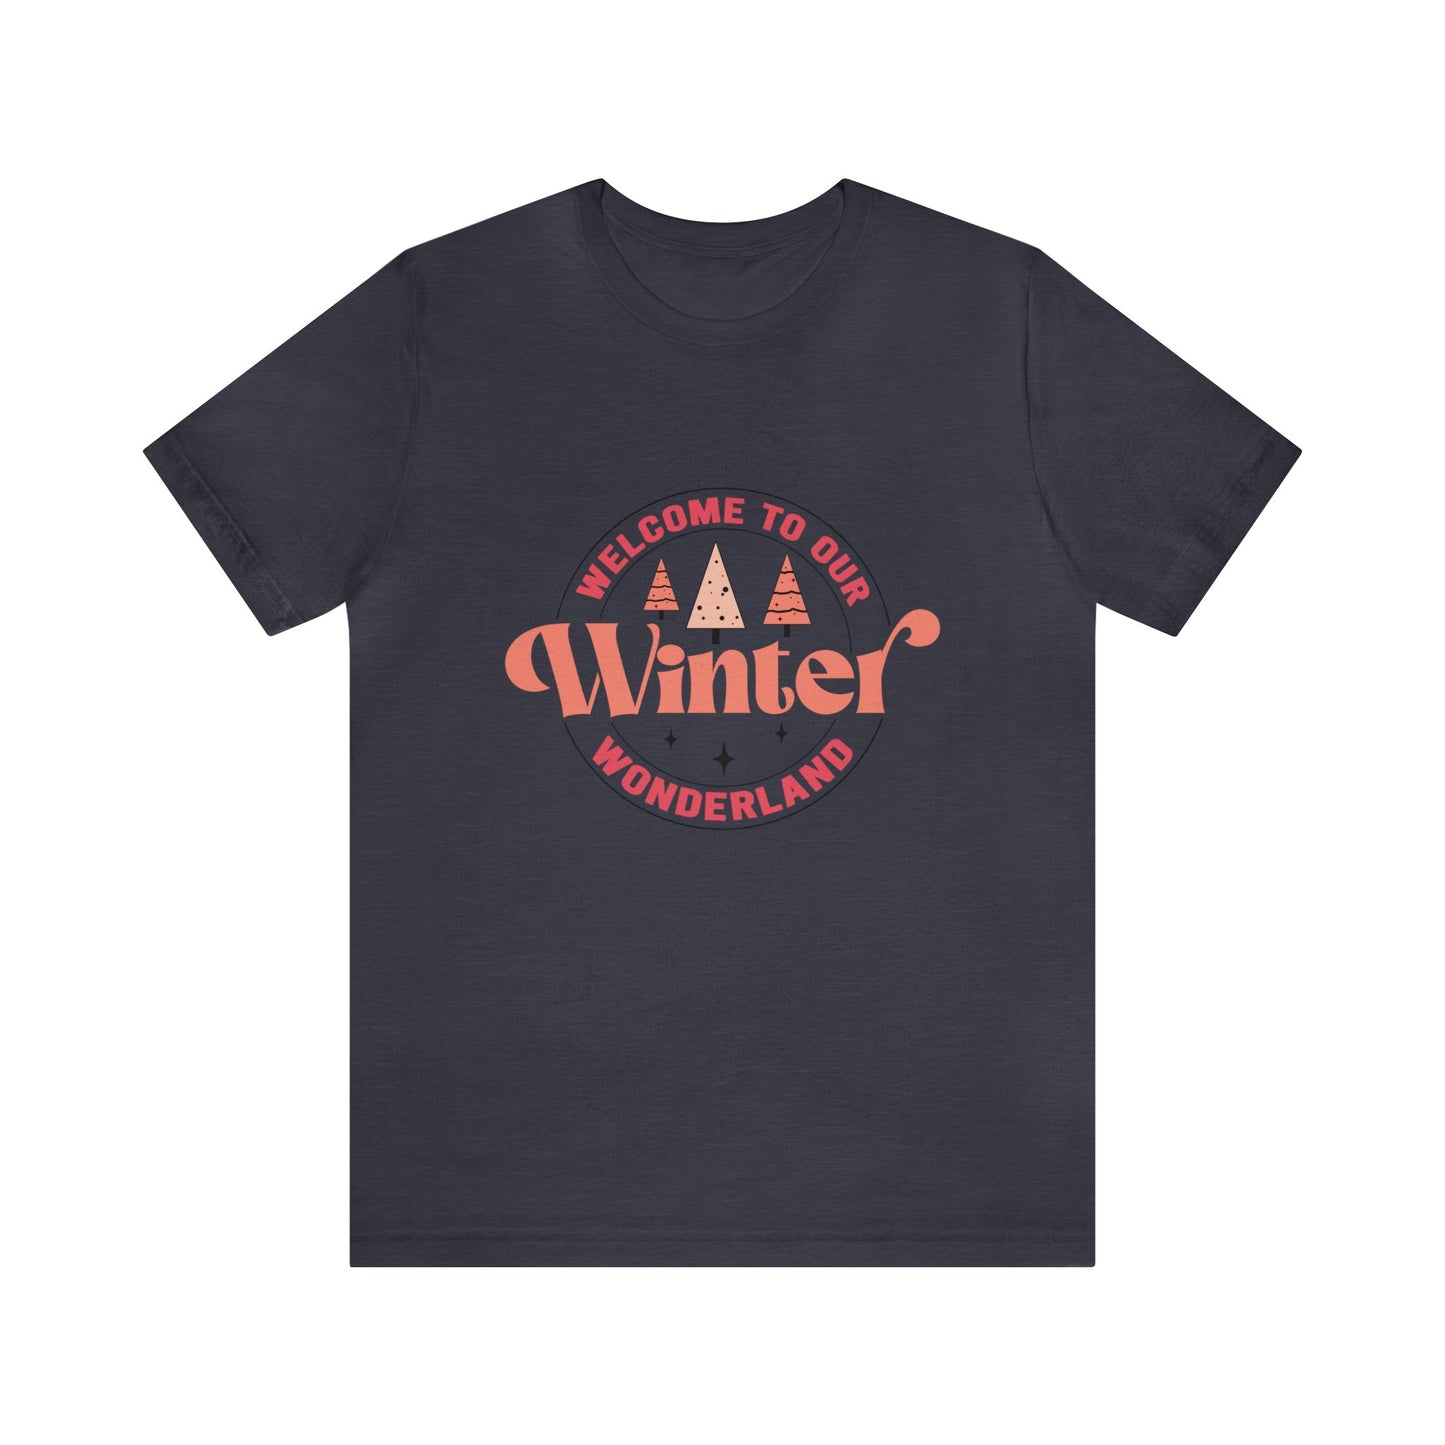 Welcome to our winter wonderland Women's Short Sleeve Christmas T Shirts